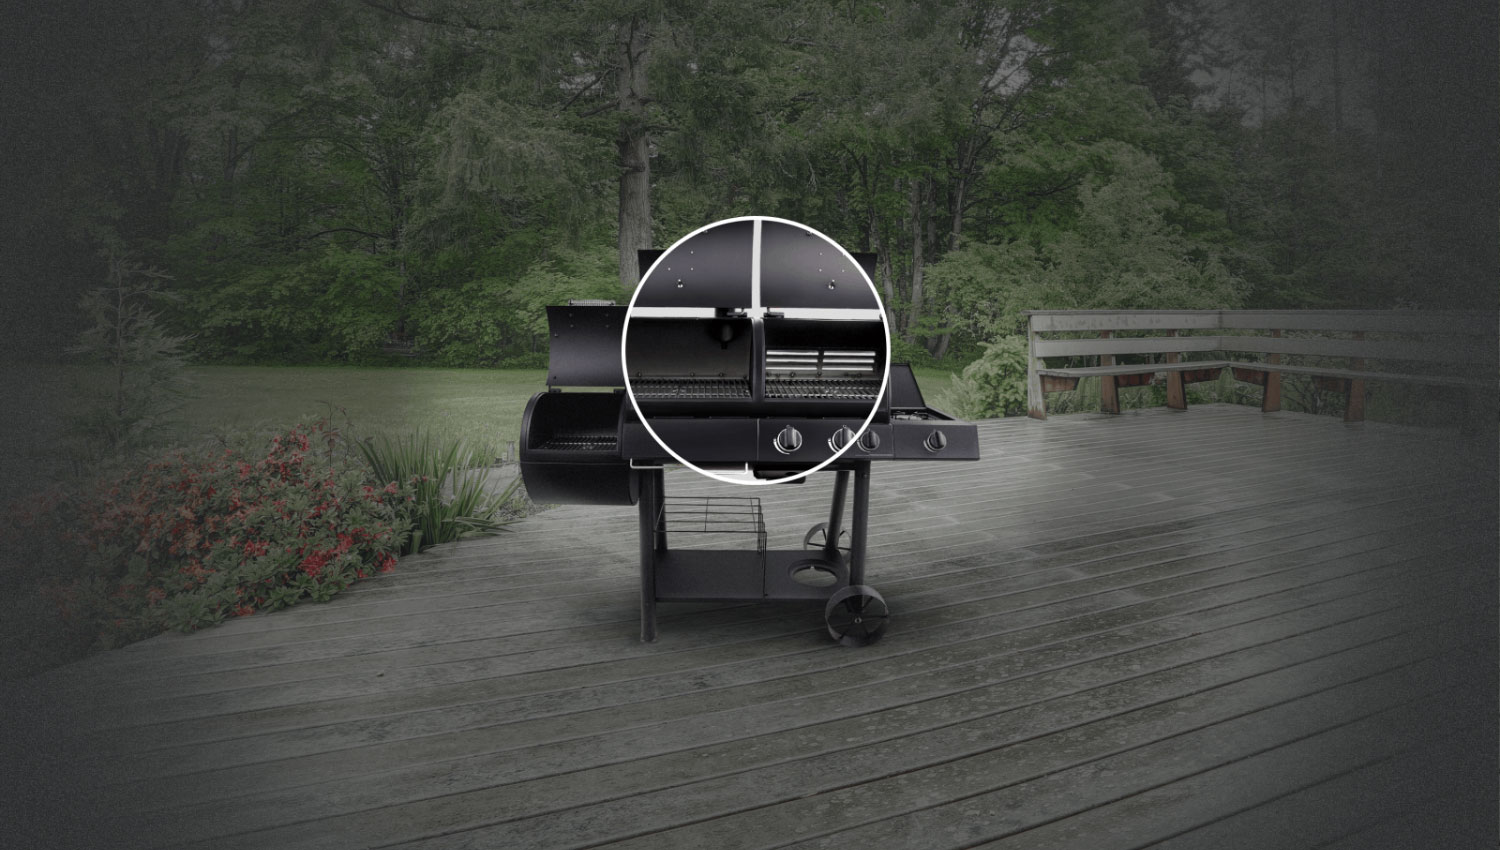 Separate cooking chambers for high-capacity smoking, charcoal grilling or gas grilling.